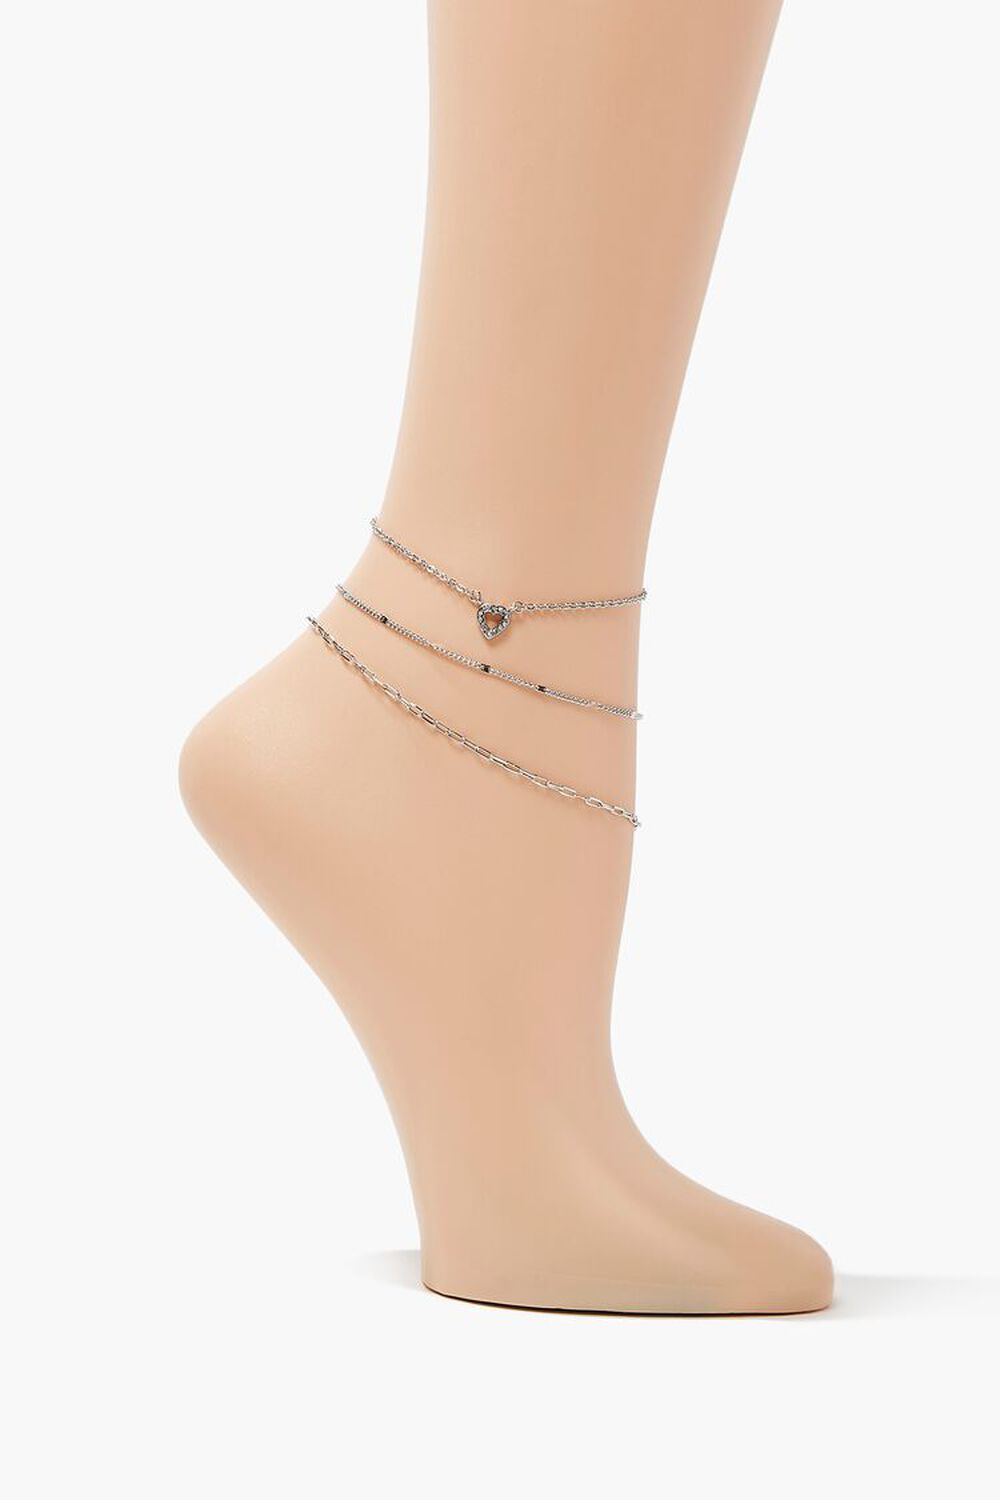 SILVER/CLEAR Heart Charm Chain Anklet Set, image 1